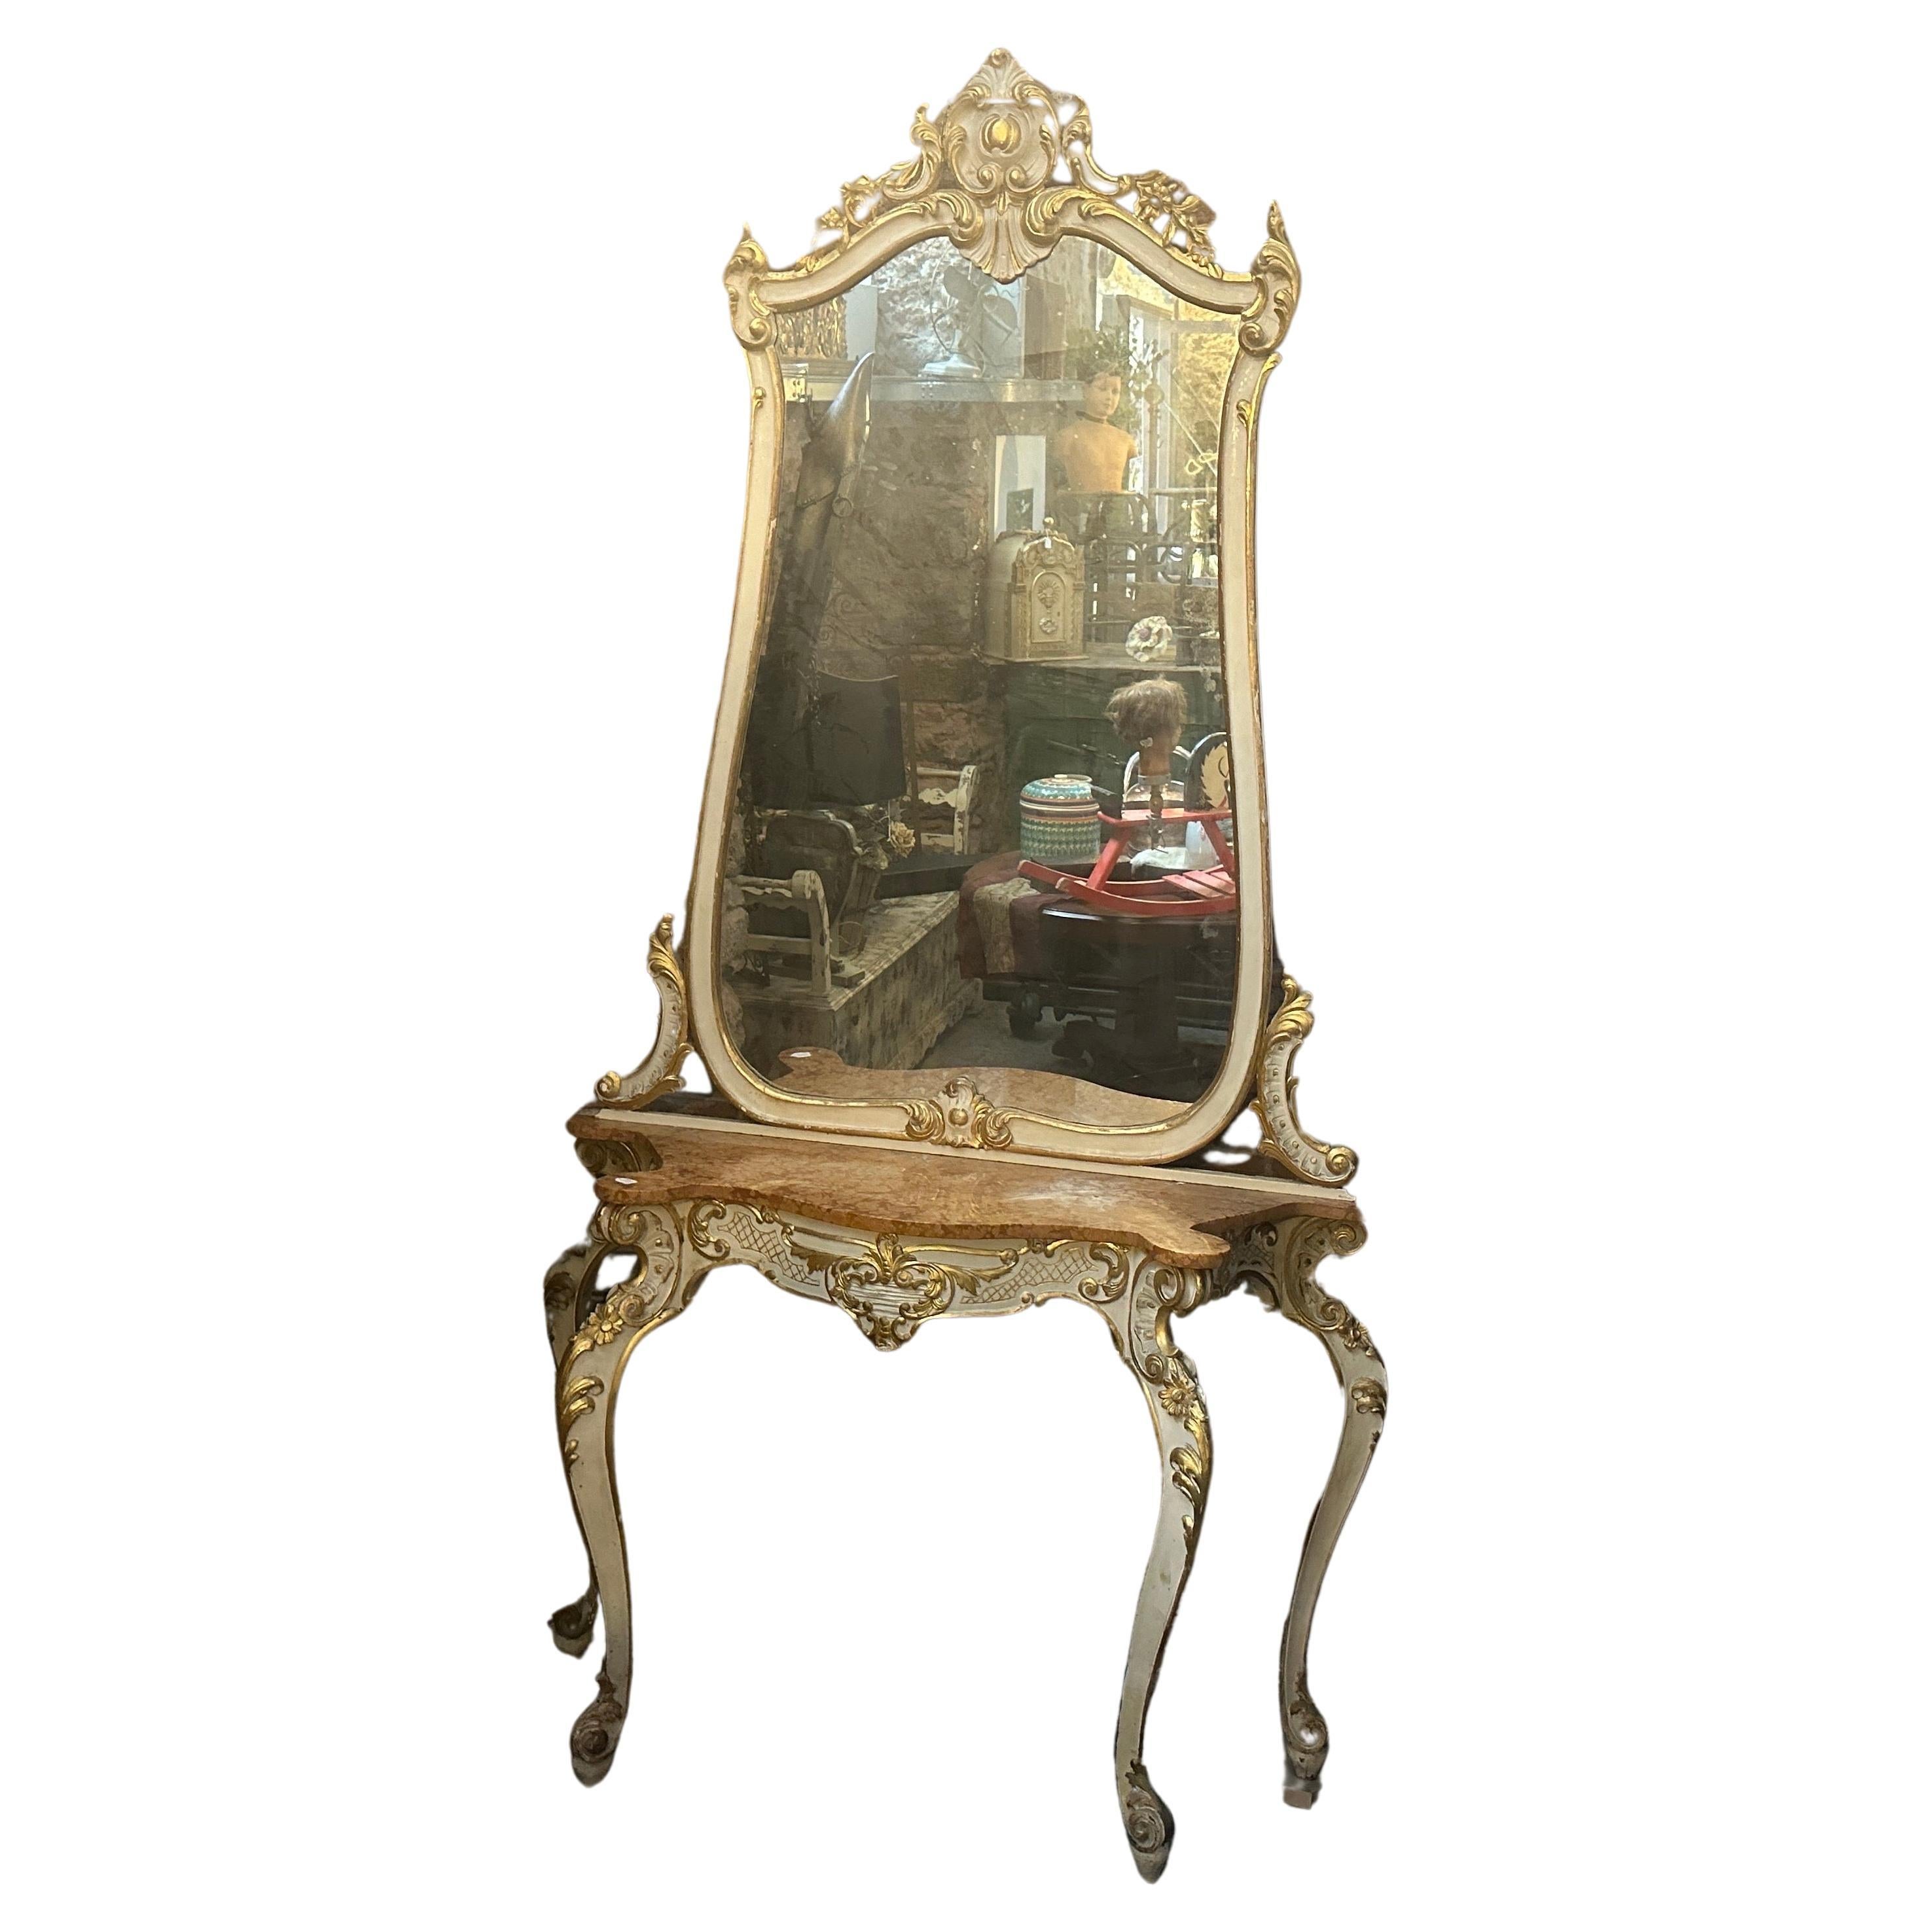 This Sicilian Console with its Mirror is a magnificent piece of furniture and decor that encapsulates the opulence and ornate design elements of the Baroque era. This ensemble consists of a console table and an accompanying mirror, both exquisitely